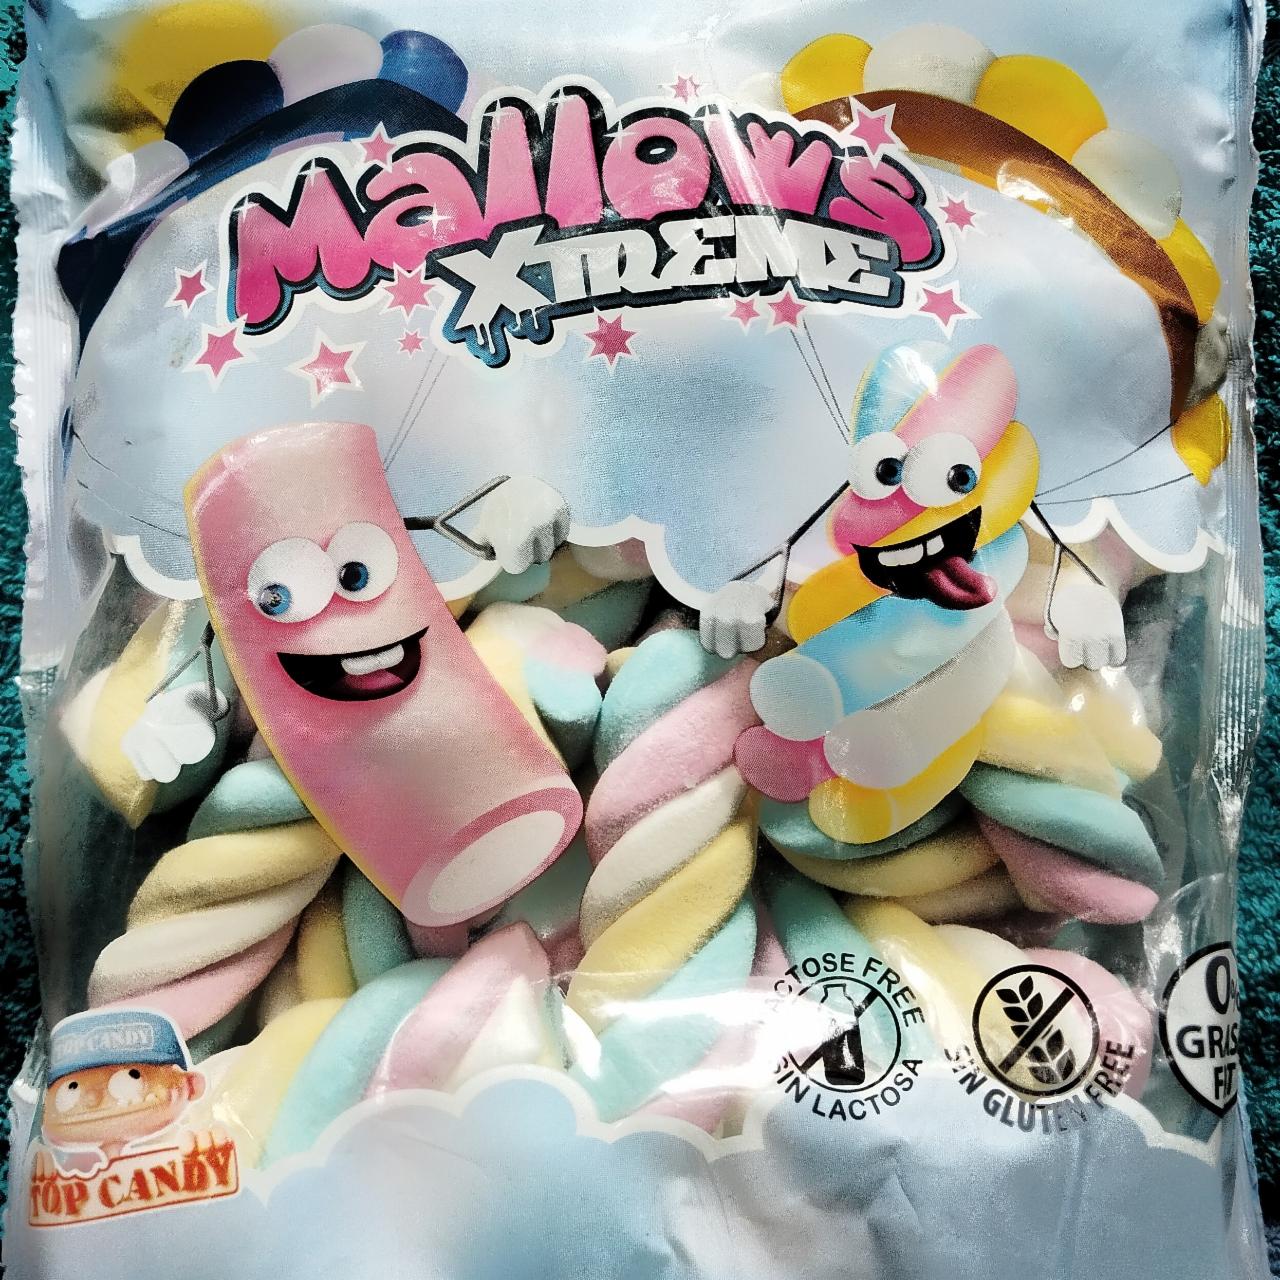 Fotografie - Mallows xtreme Top Candy